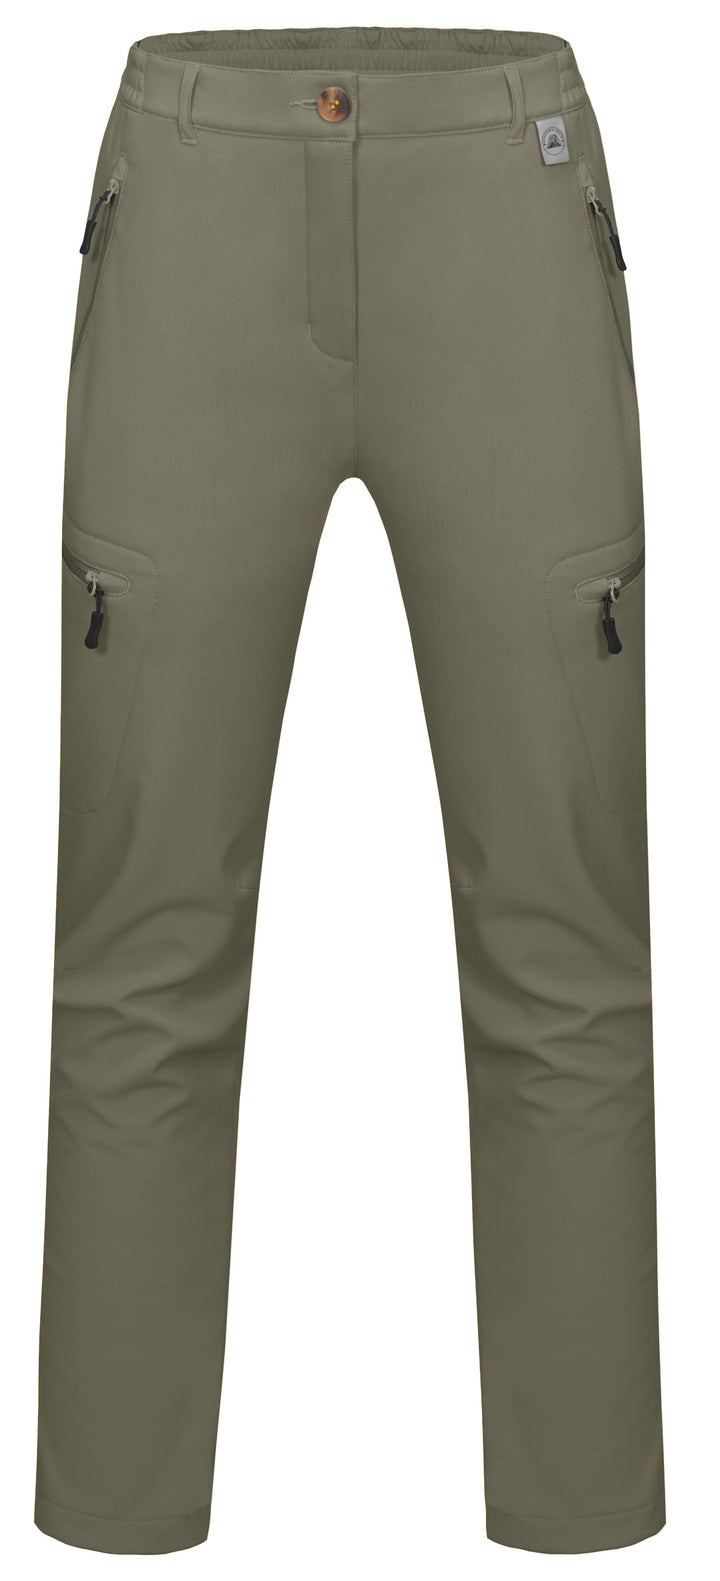 Softshell Fleece Lined Cargo Pants for Women Outdoor Tactical Trousers MP-US-DK